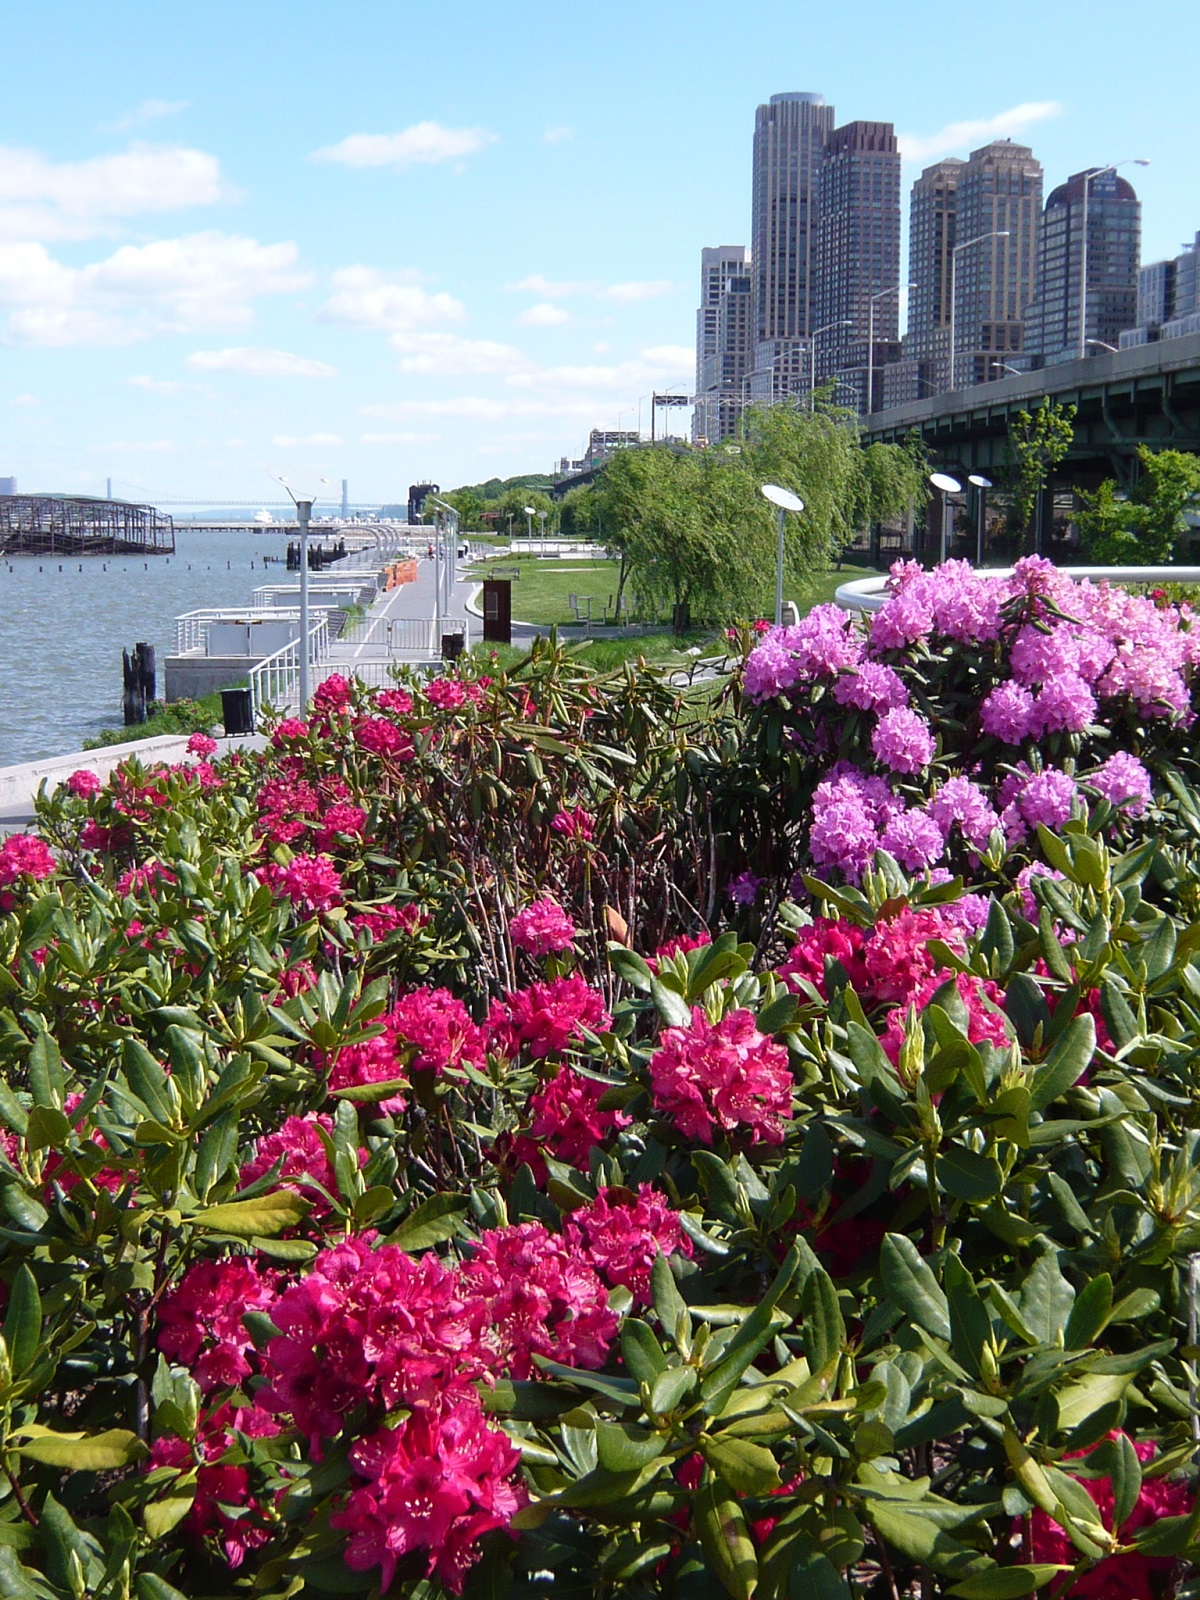 Riverside park, one of the best parks in NYC, filled with flowers and greenery in the summer